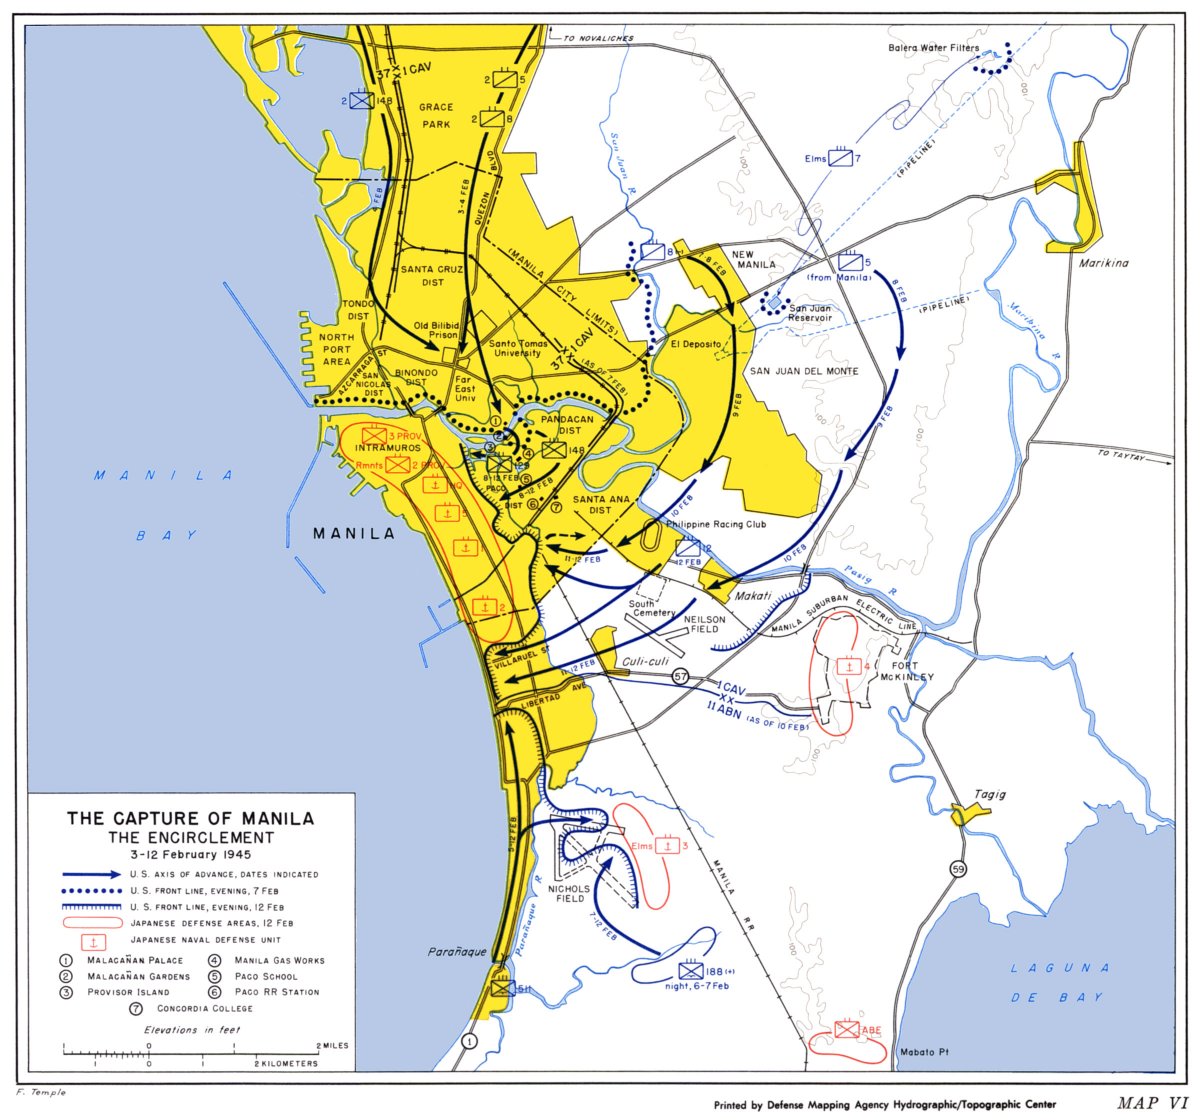 The Encirclement of Manila by U.S. forces.